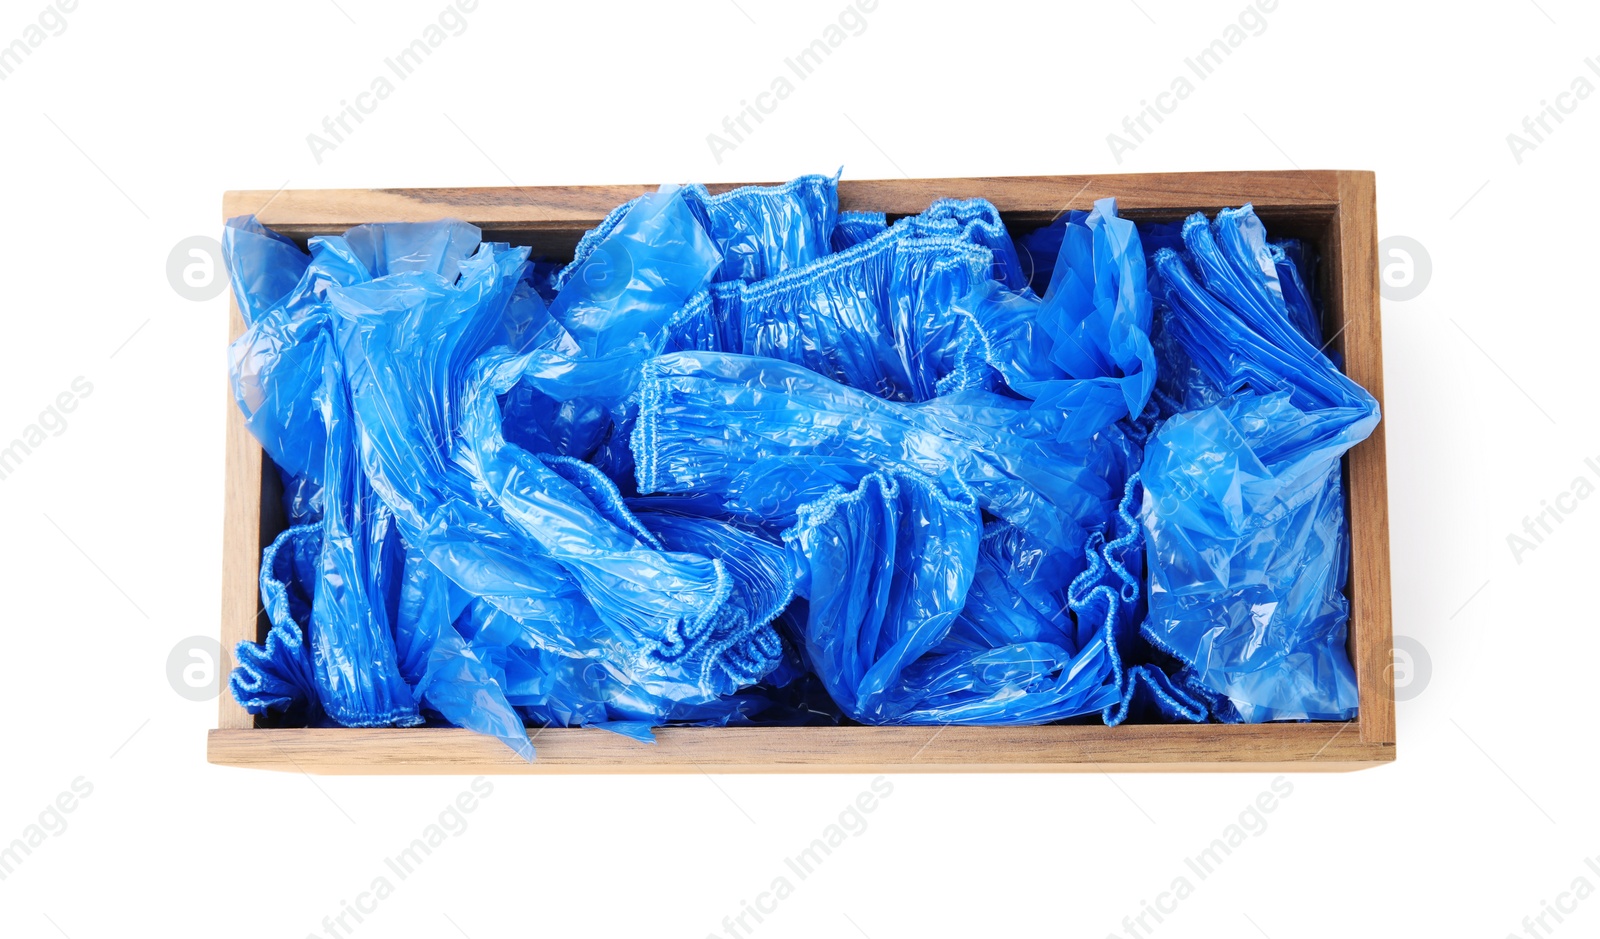 Photo of Blue medical shoe covers in wooden crate isolated on white, top view